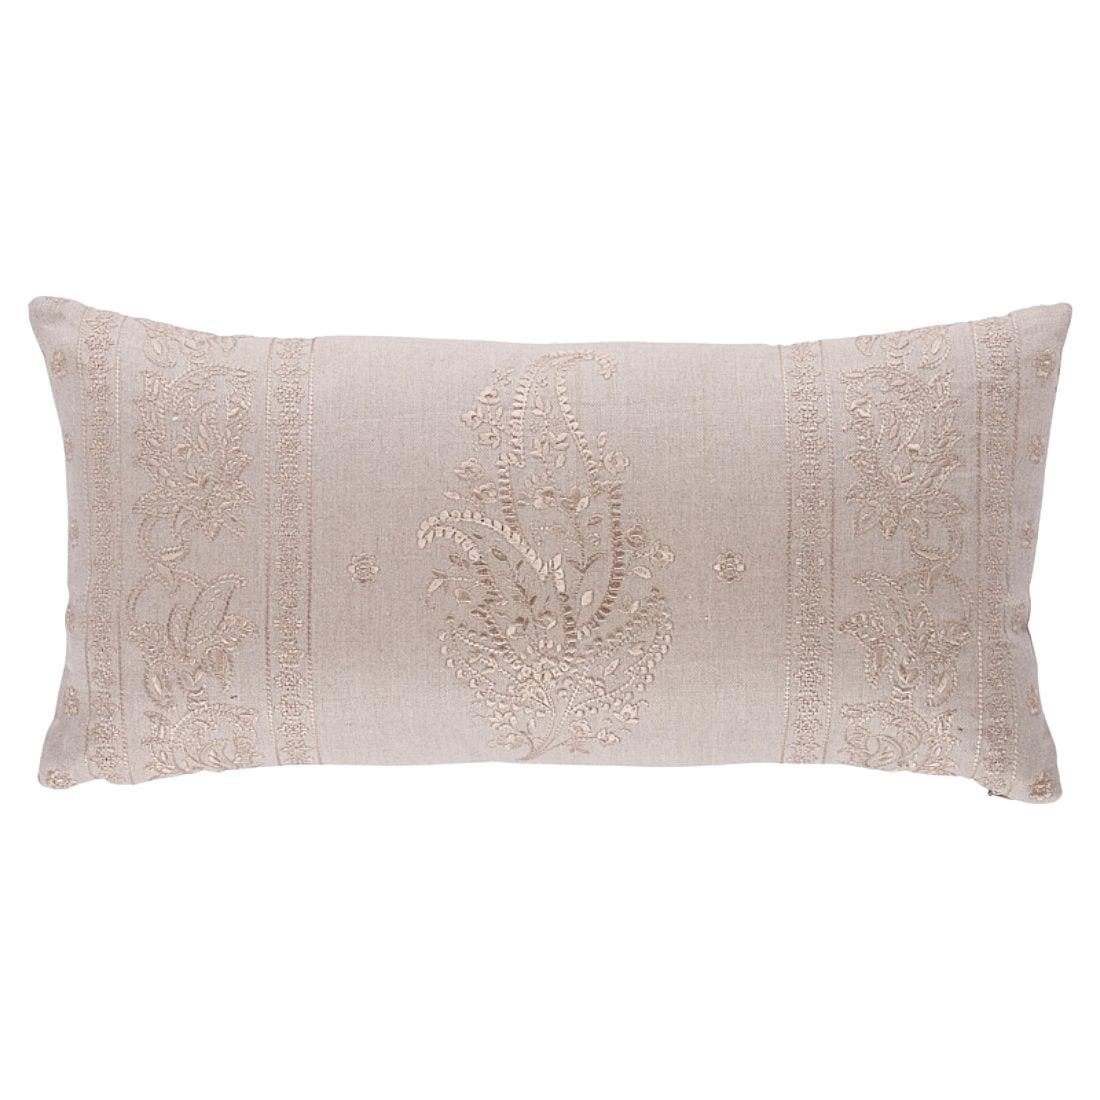 Schumacher Jaipur Linen Embroidery Pillow In Flax For Sale